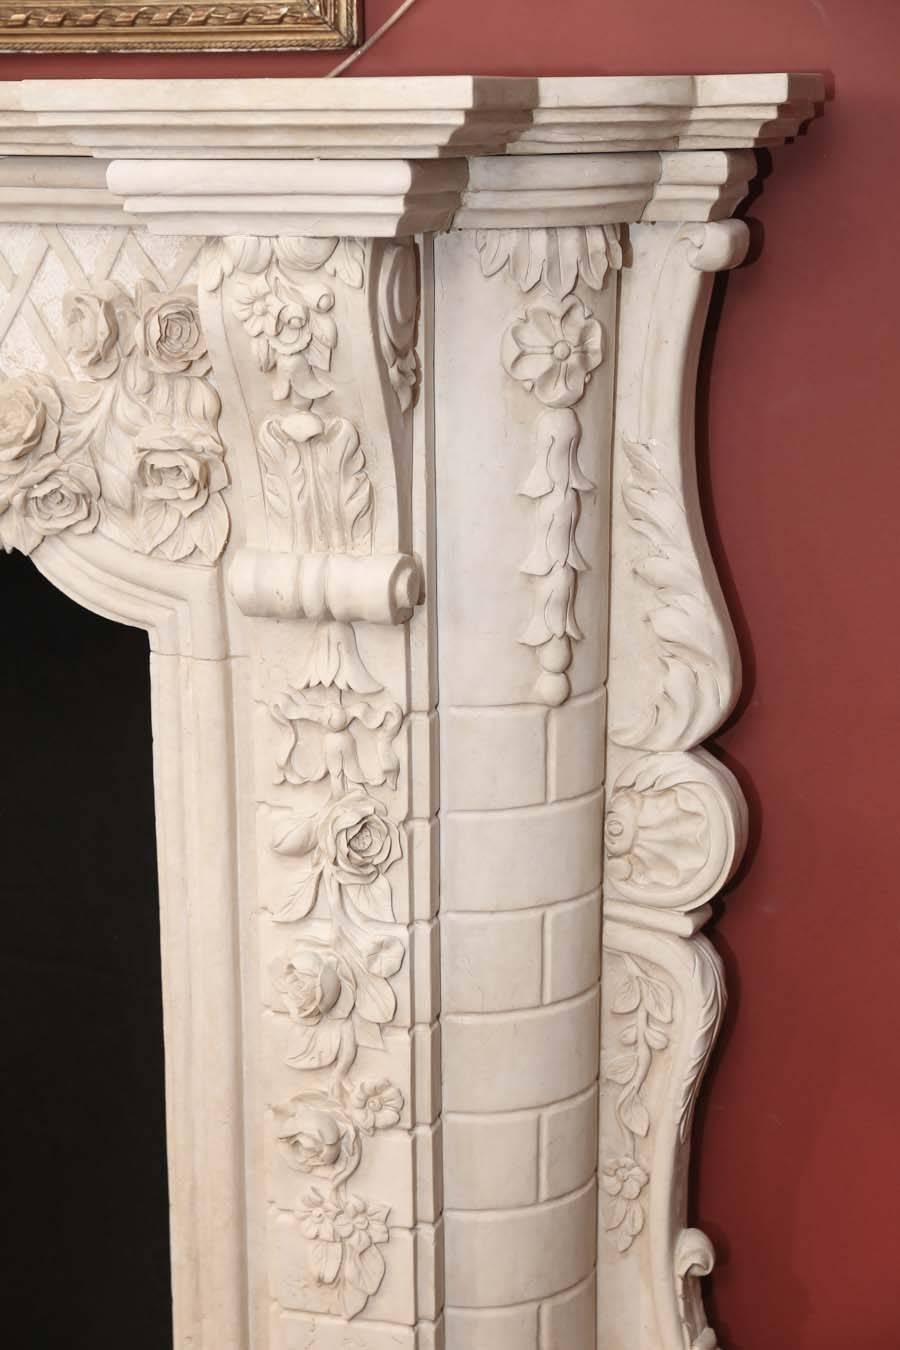 Chinese Cream Marble Mantel with Extensive Hand Carving, Foliate Design